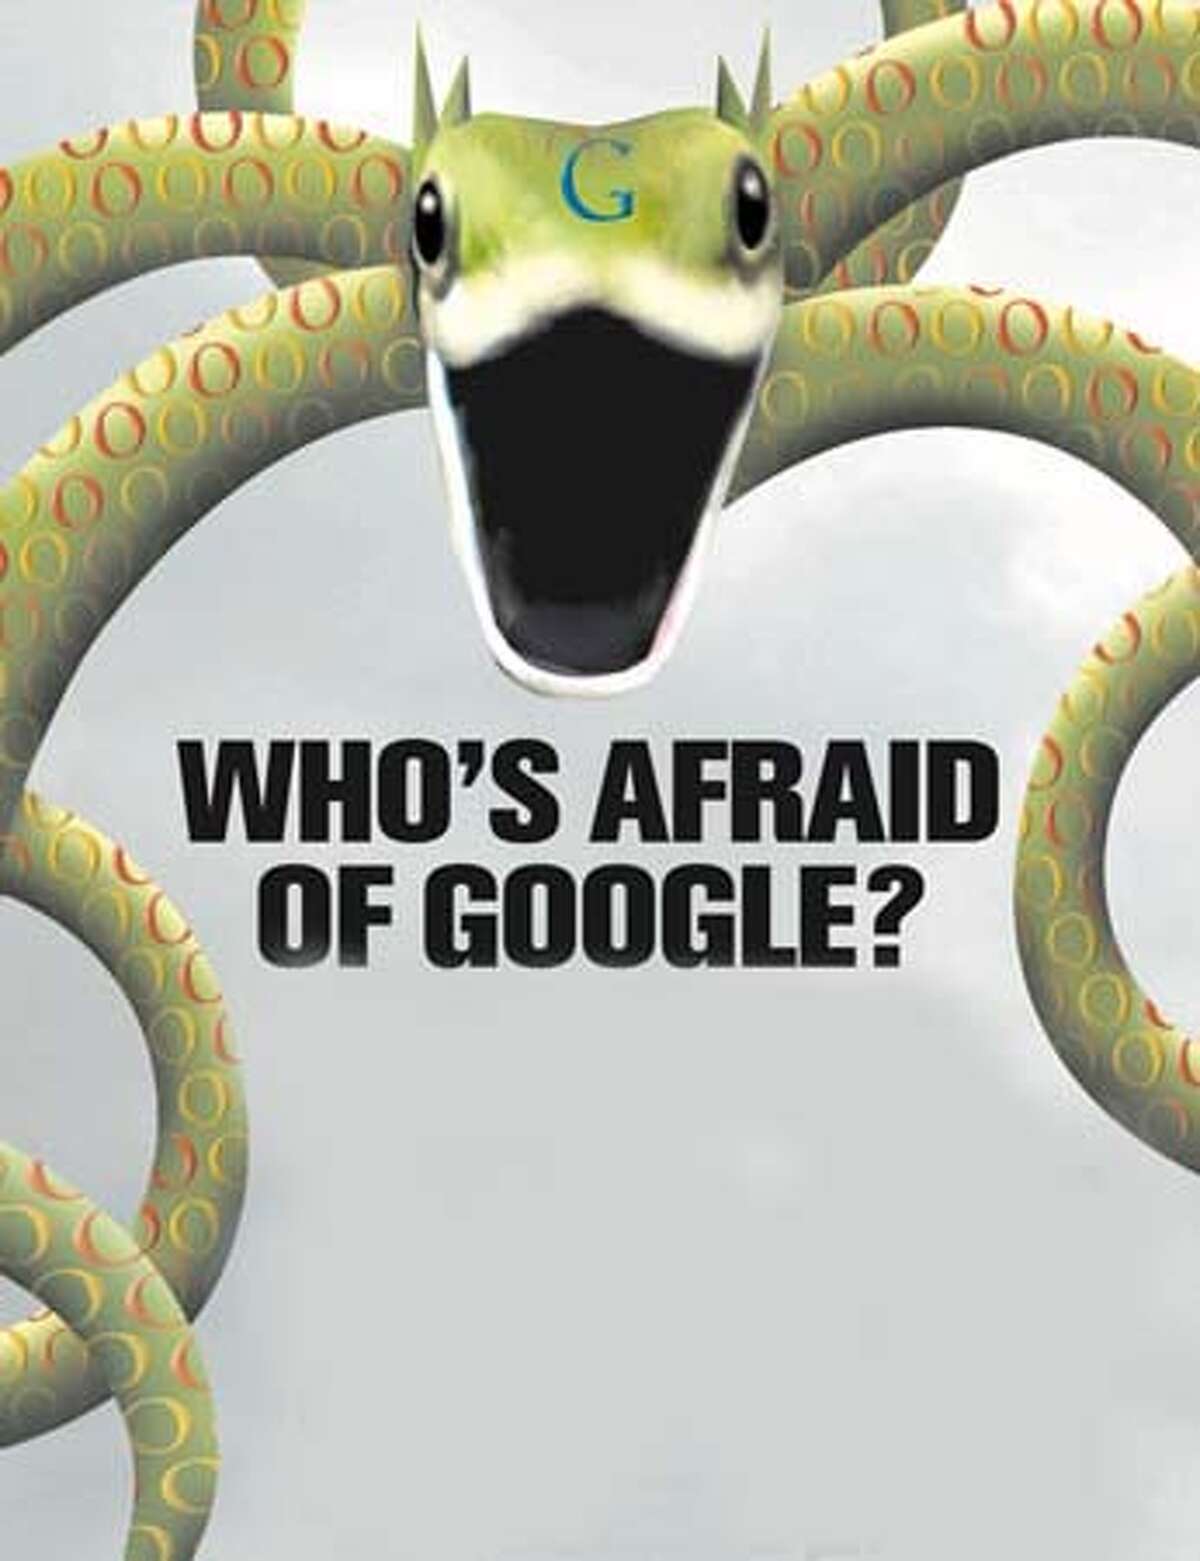 Who's afraid of Google? Chronicle illustration by Tracy Cox